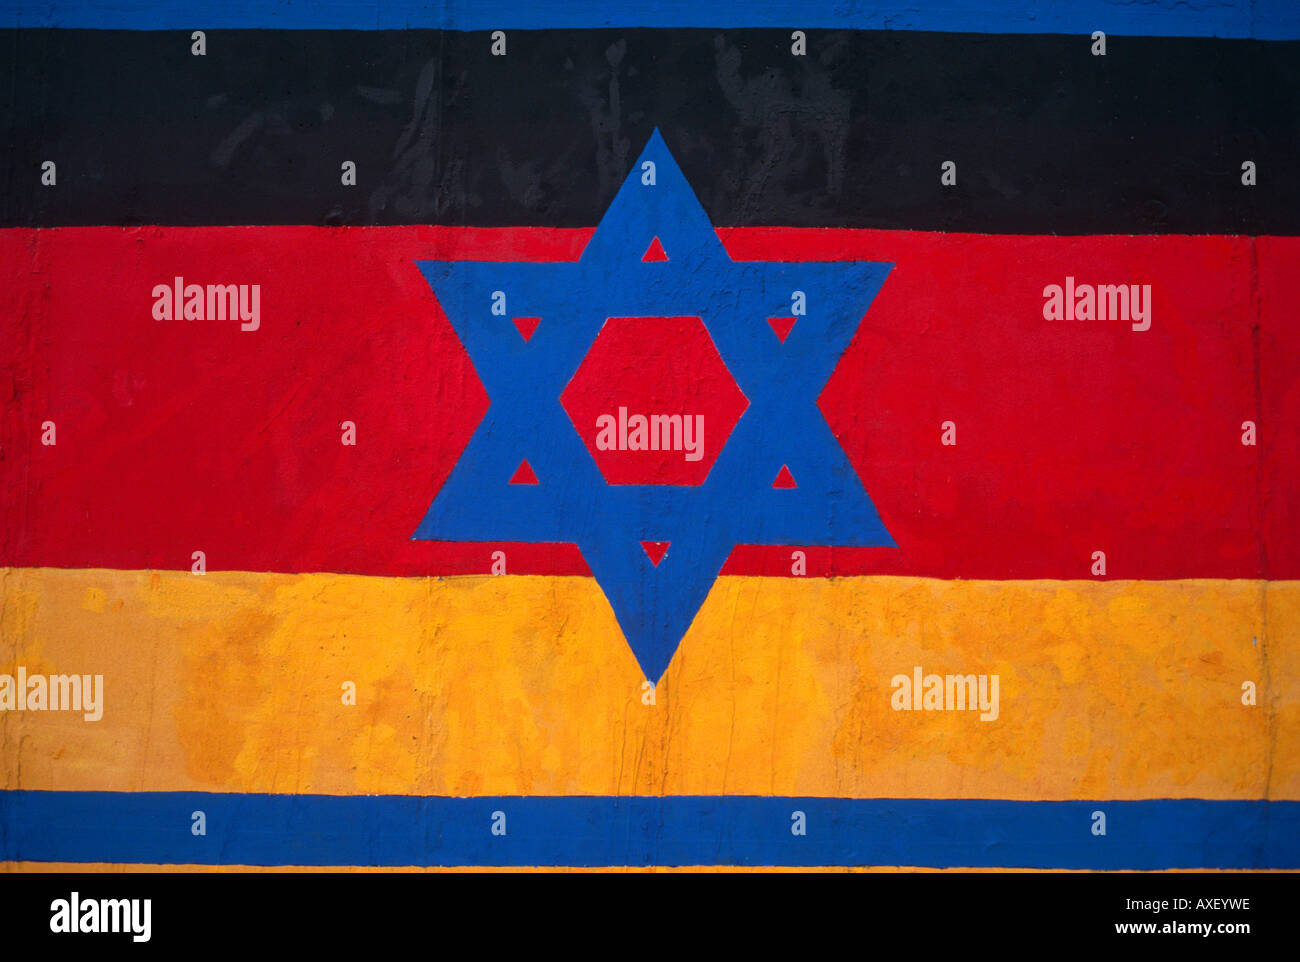 Graffiti detail from the Berlin Wall showing the Israeli Star of David over the German flag. Stock Photo